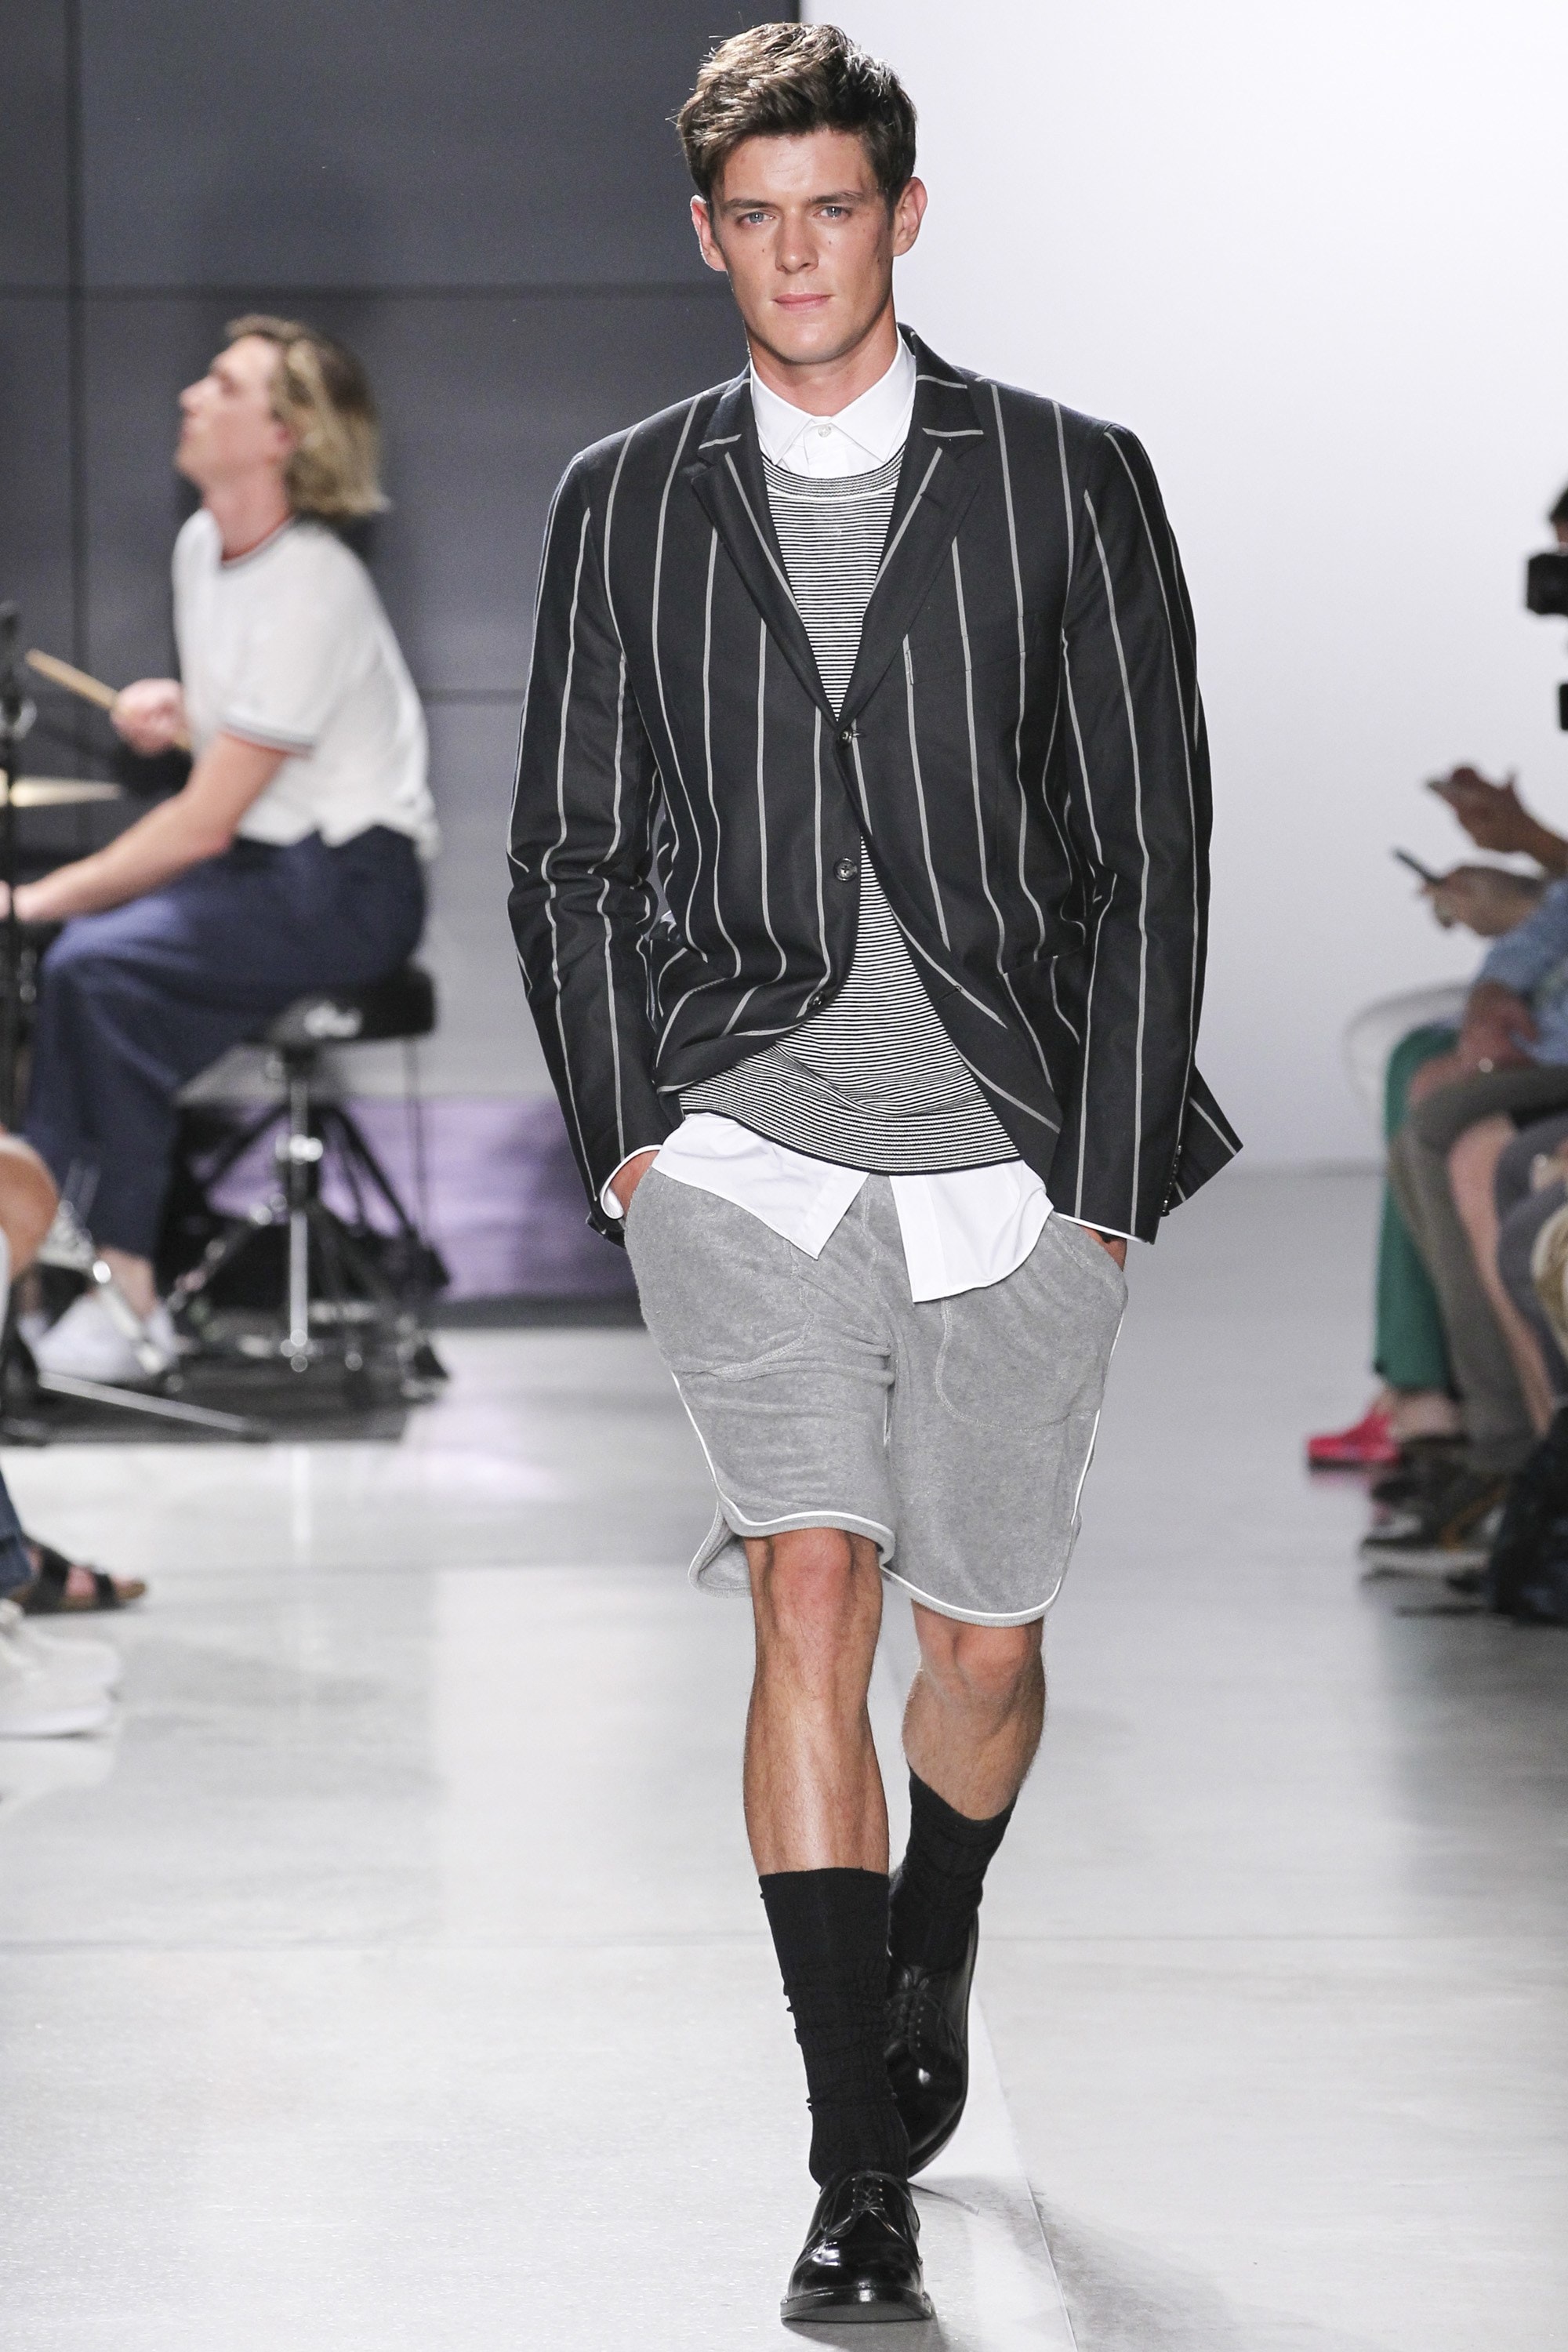 Todd Snyder 2018 Spring Summer Collection Runway Show